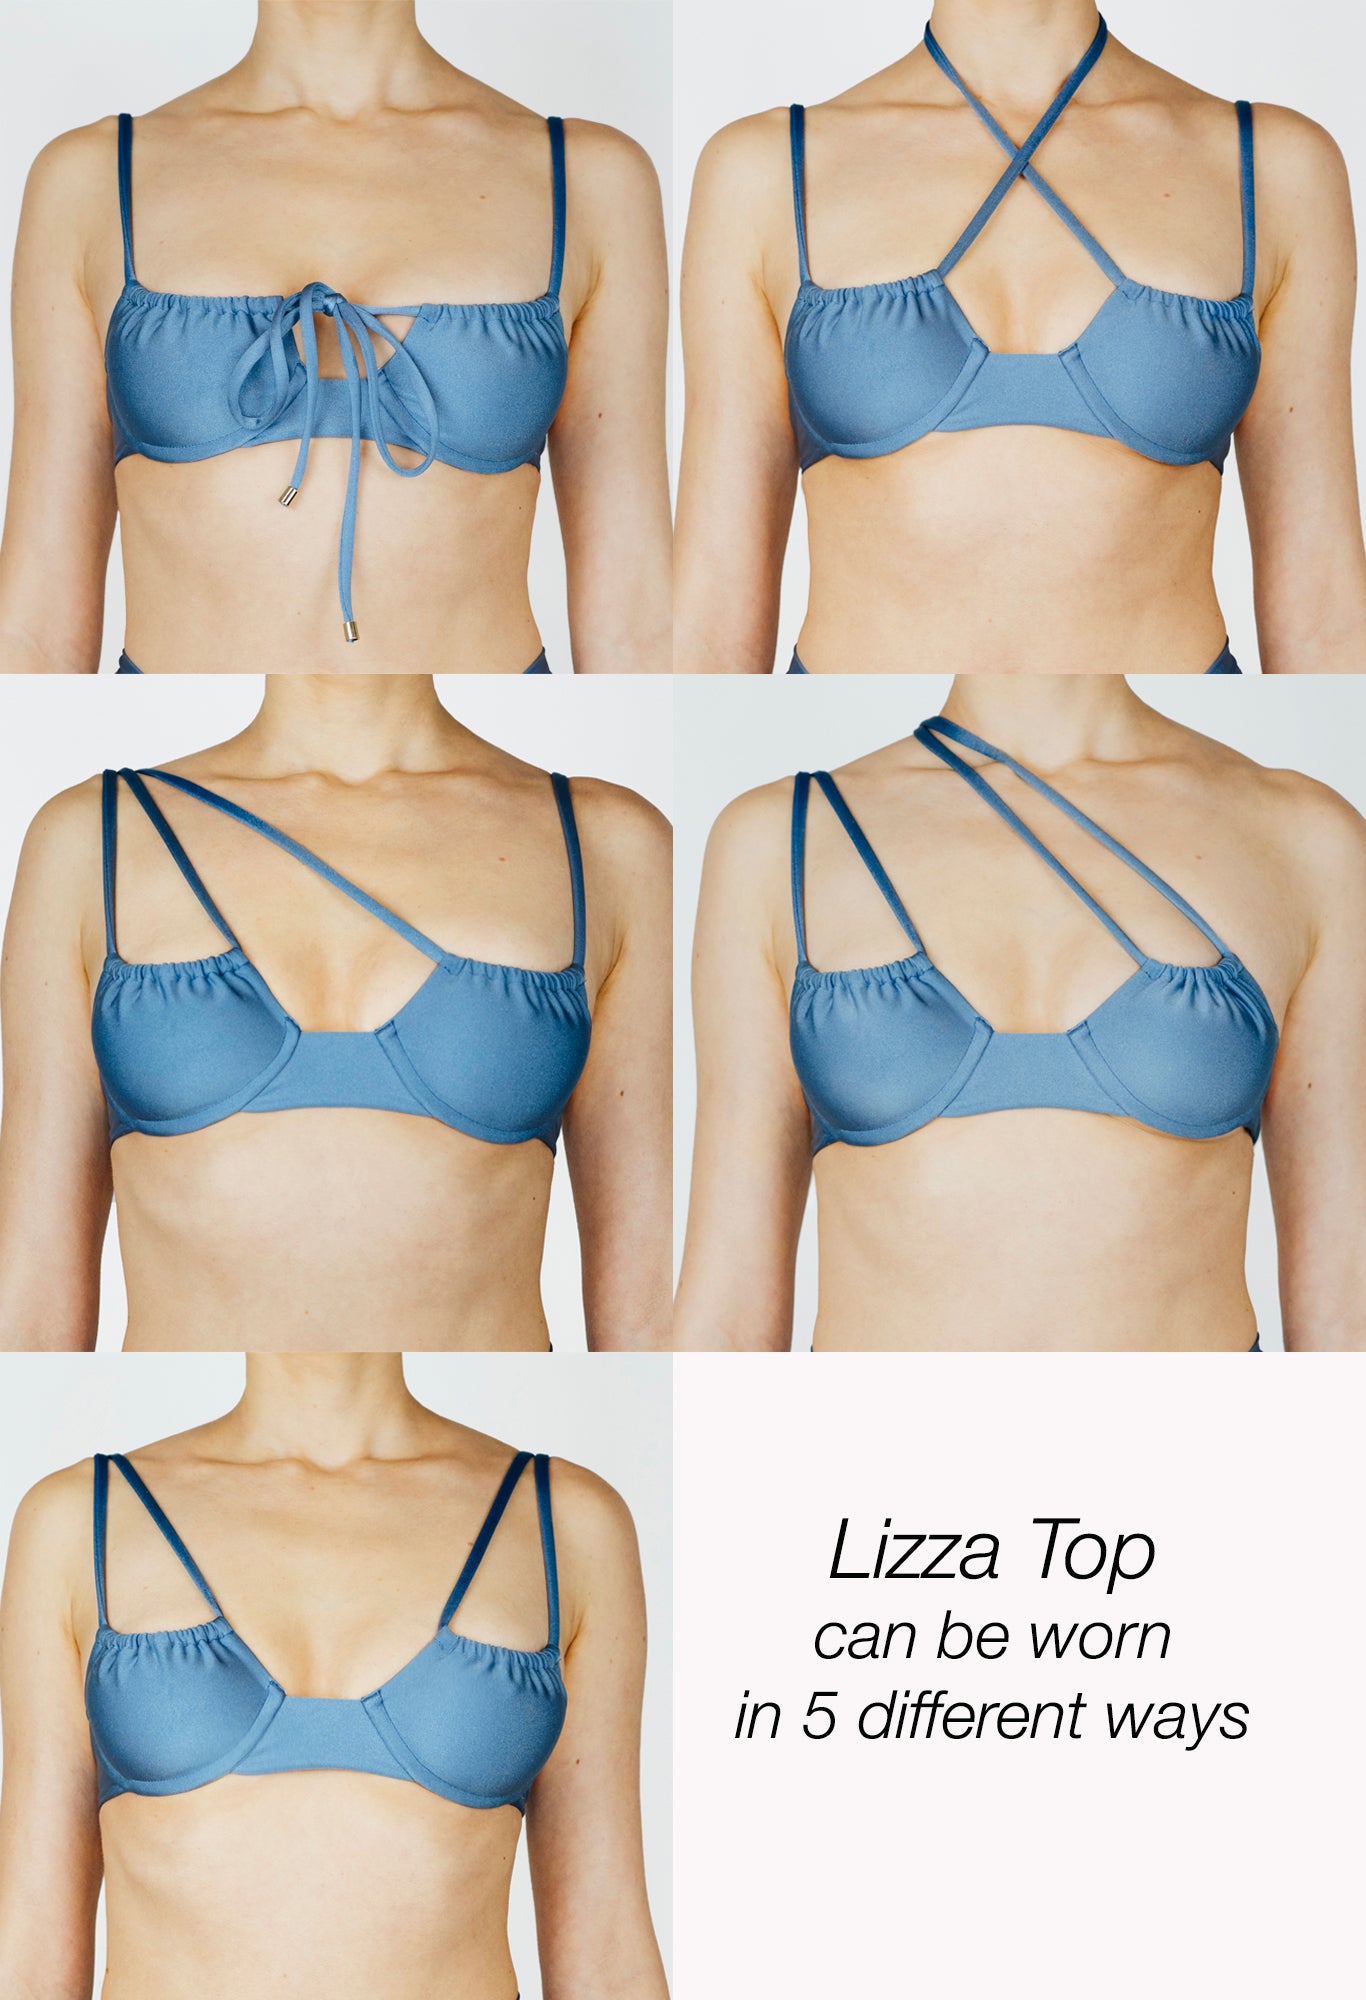 Lizza tpo - azula. An adjustable top with golden details.